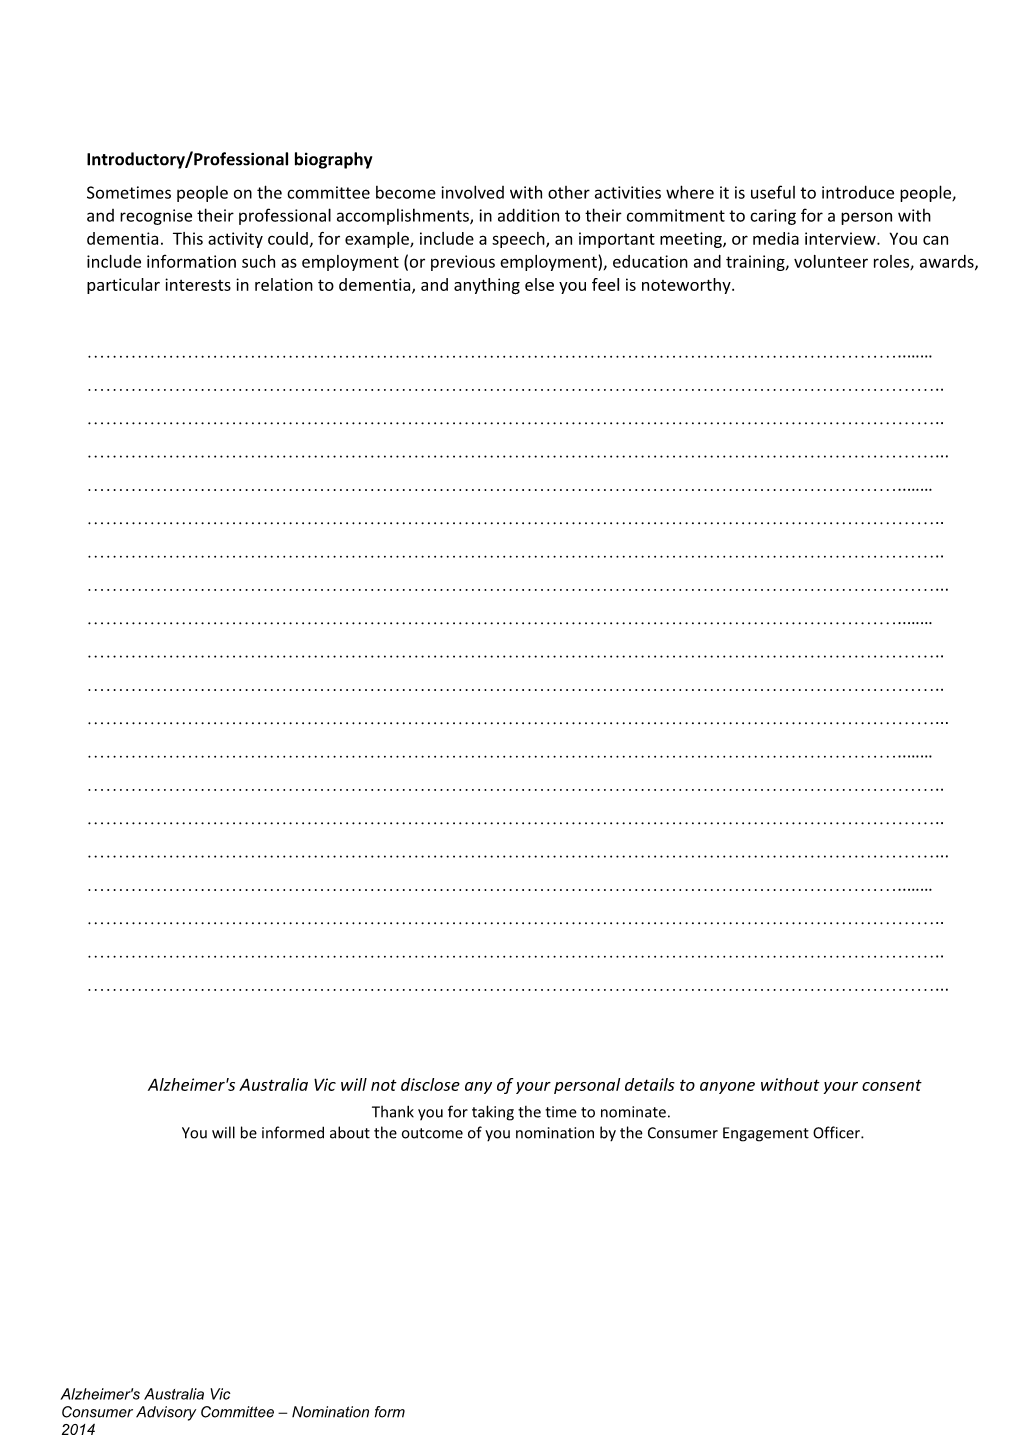 Consumer Advisory Committee Nomination Form